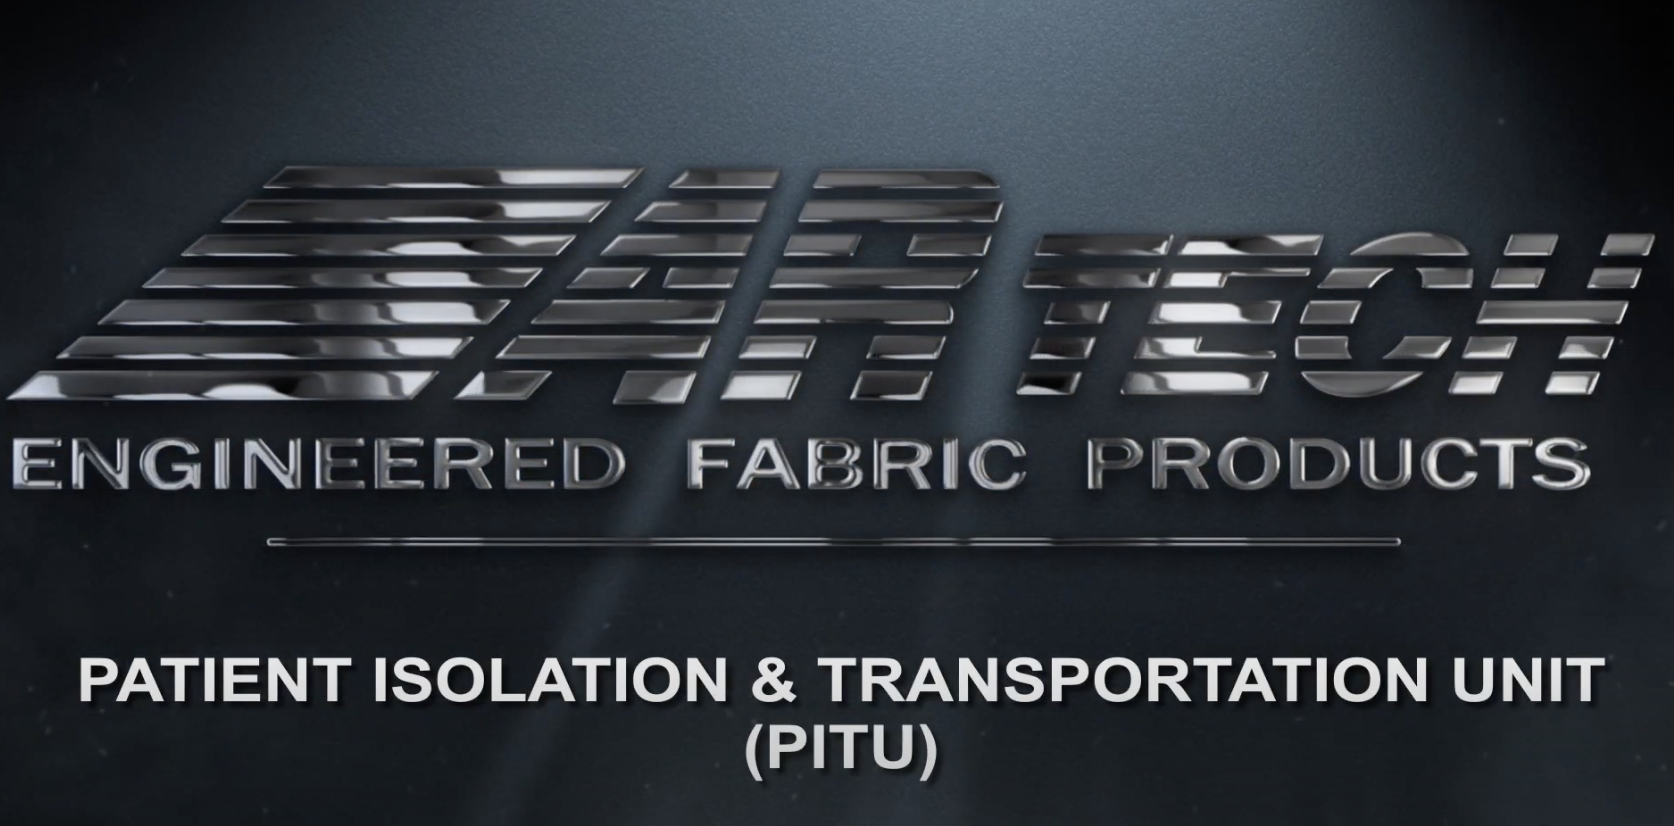 image of the logo for AR Tech Engineered Fabric Products's Patient Isolation * Transporatation Unit (PITU)